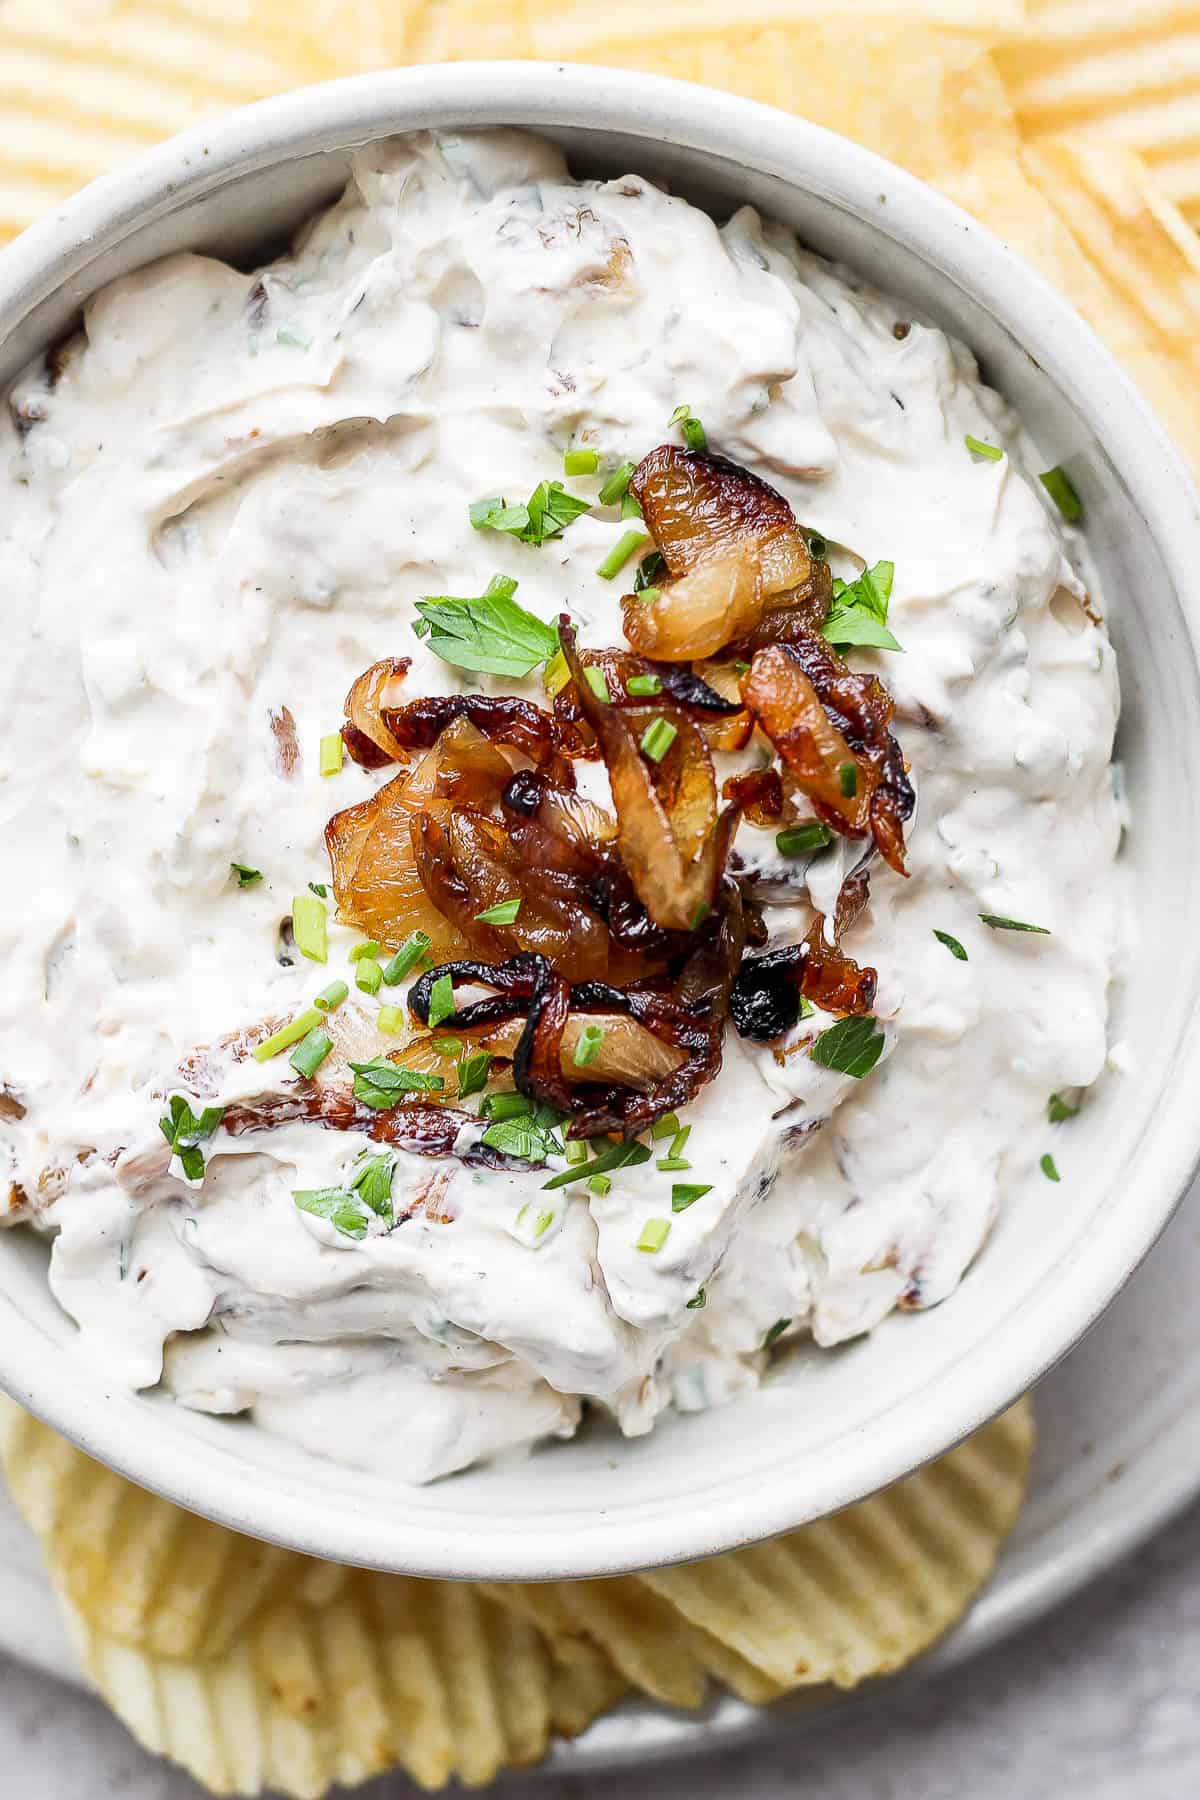 French onion dip in a bowl with some fresh herbs and caramelized onions as garnish.